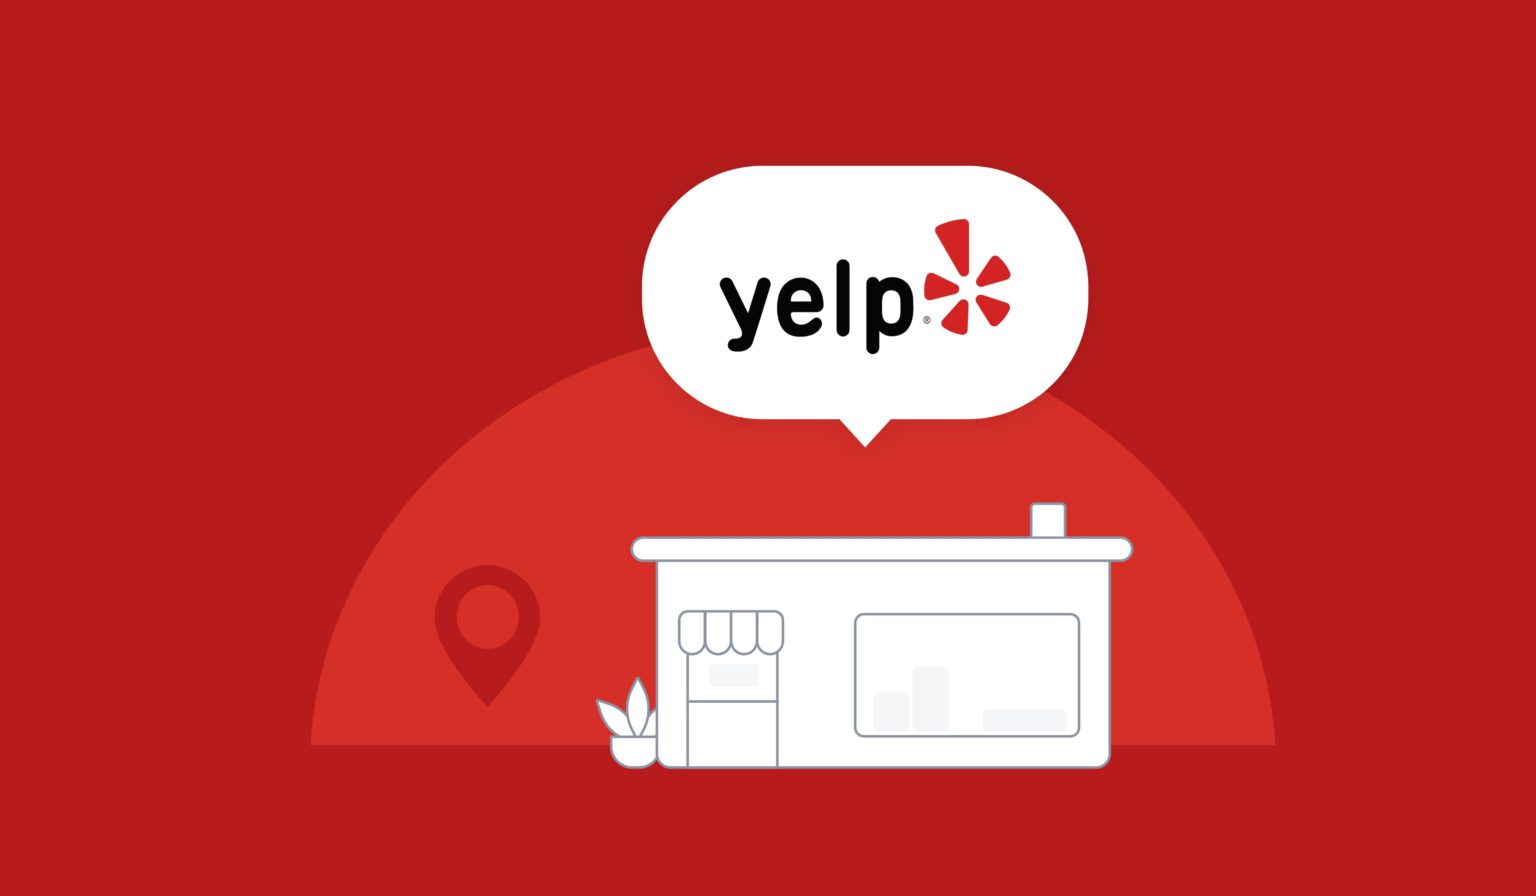 I-is-easier-to-search-for-a-black-owned-business-in-Yelp